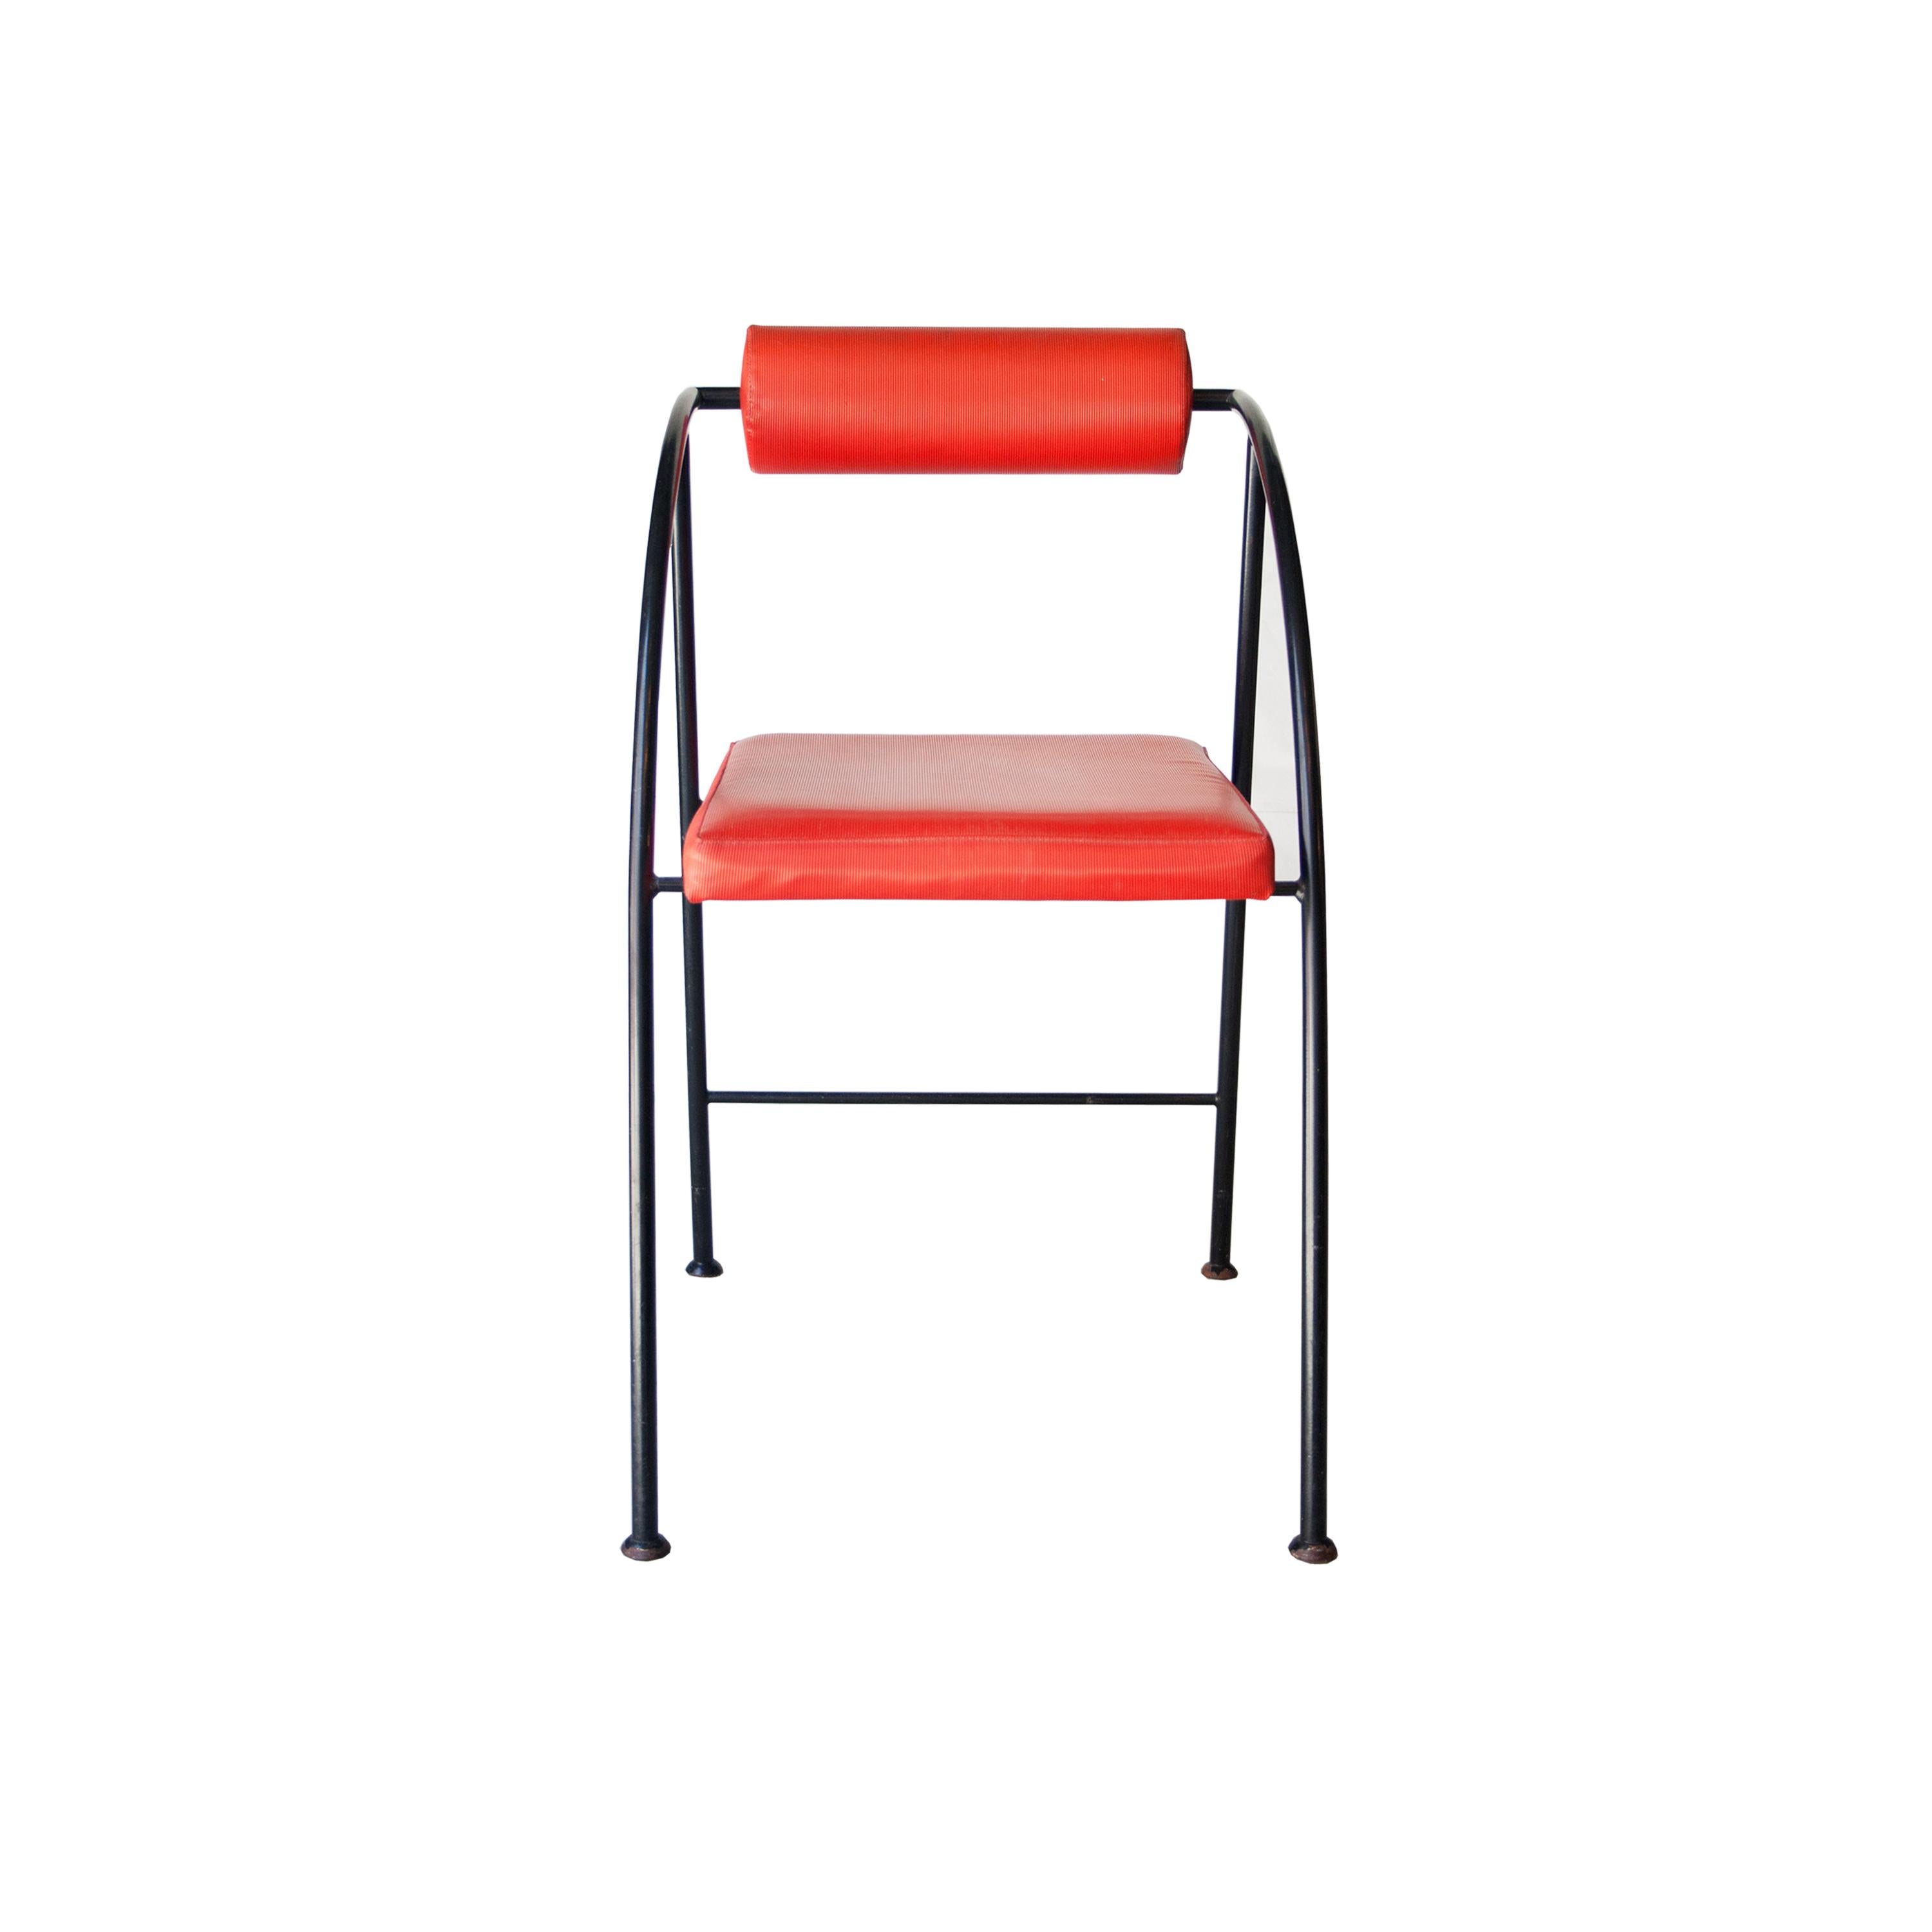 red metal chairs